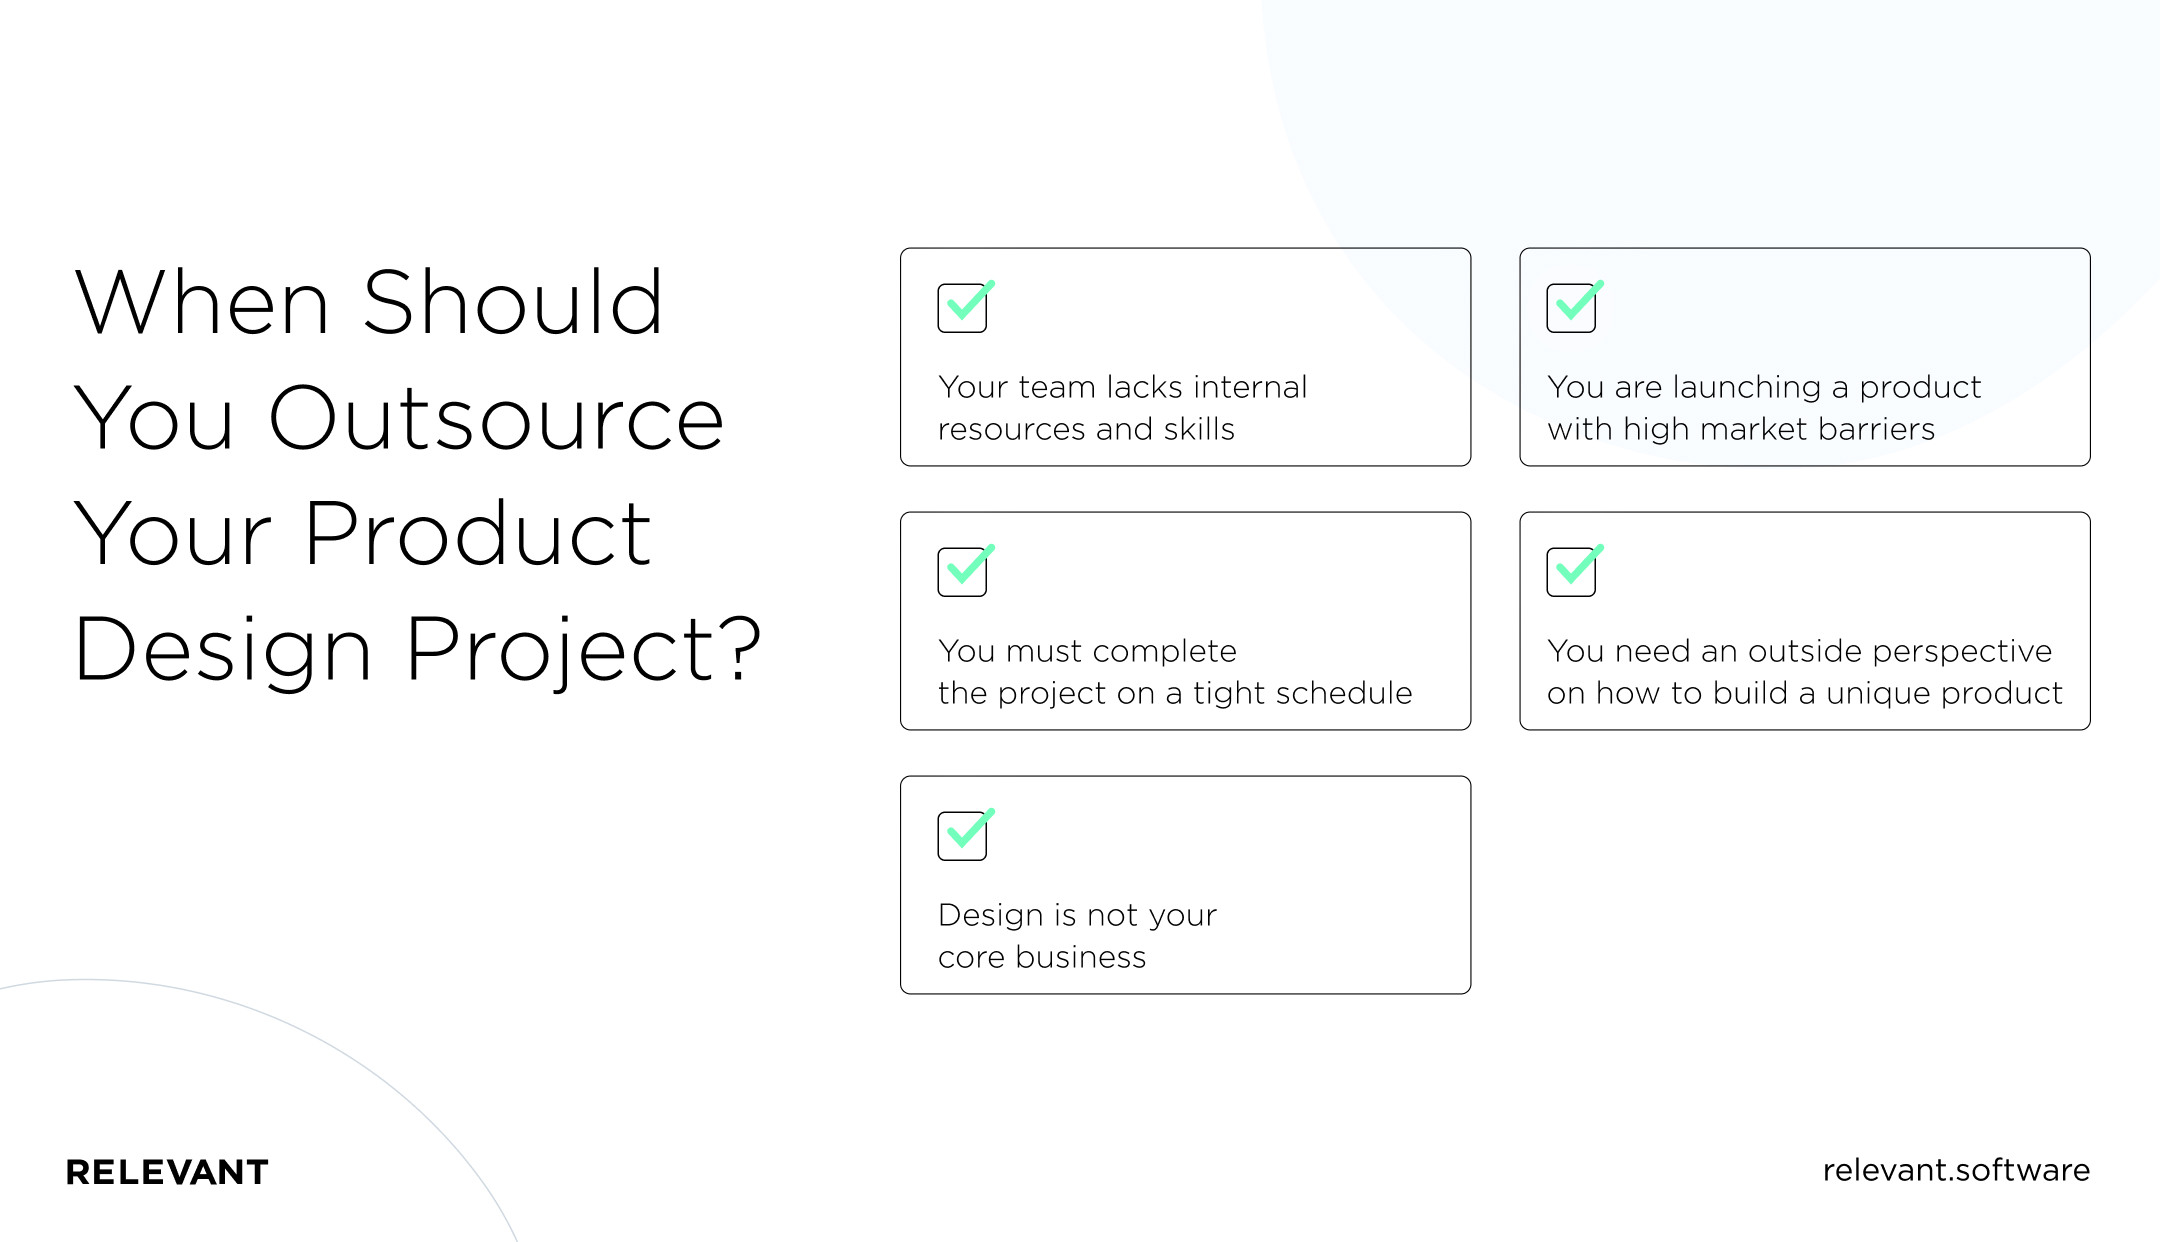 When Should You Outsource Your Product Design Project?